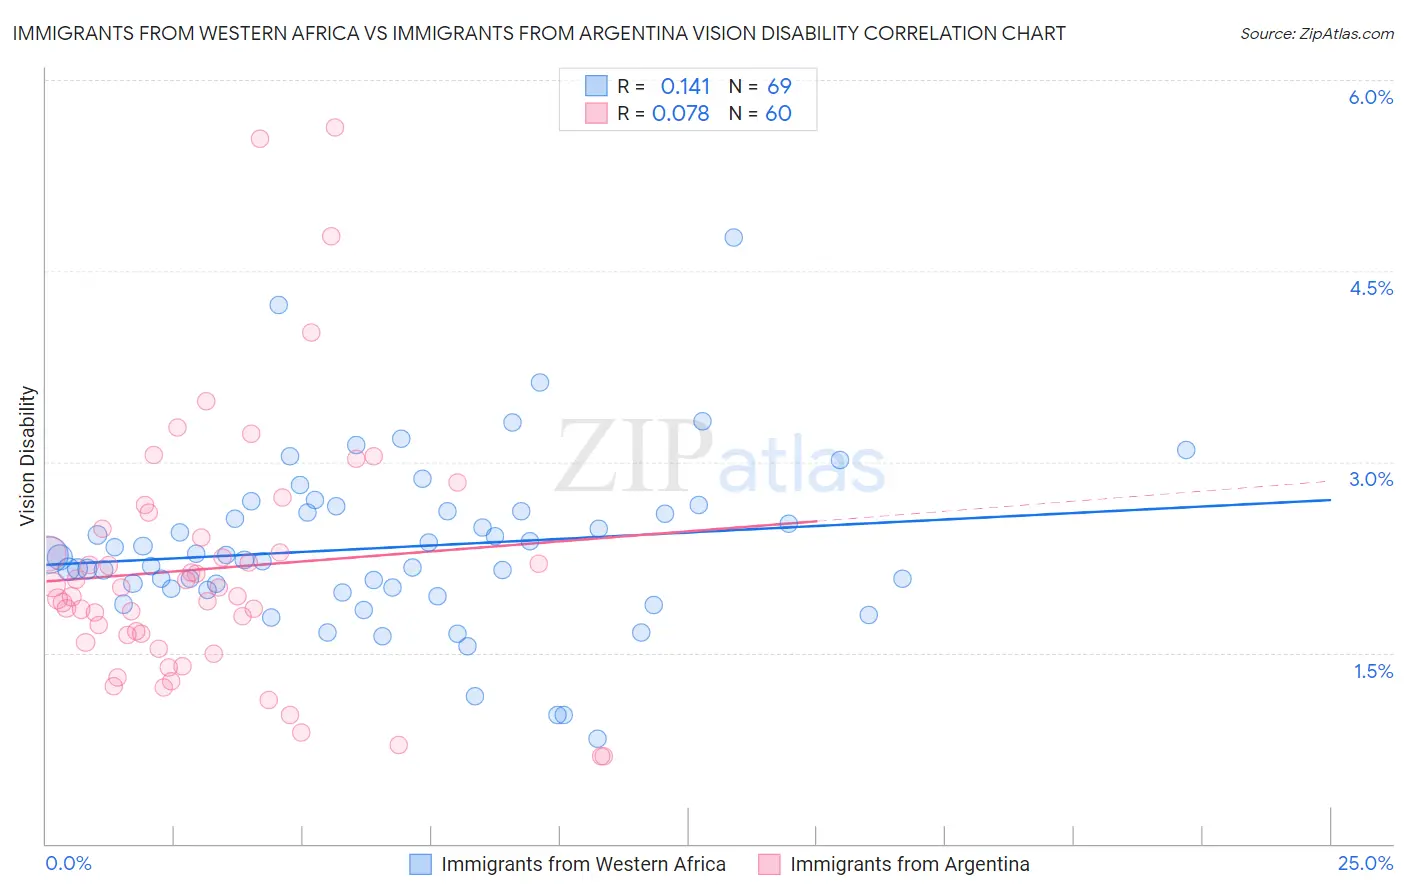 Immigrants from Western Africa vs Immigrants from Argentina Vision Disability